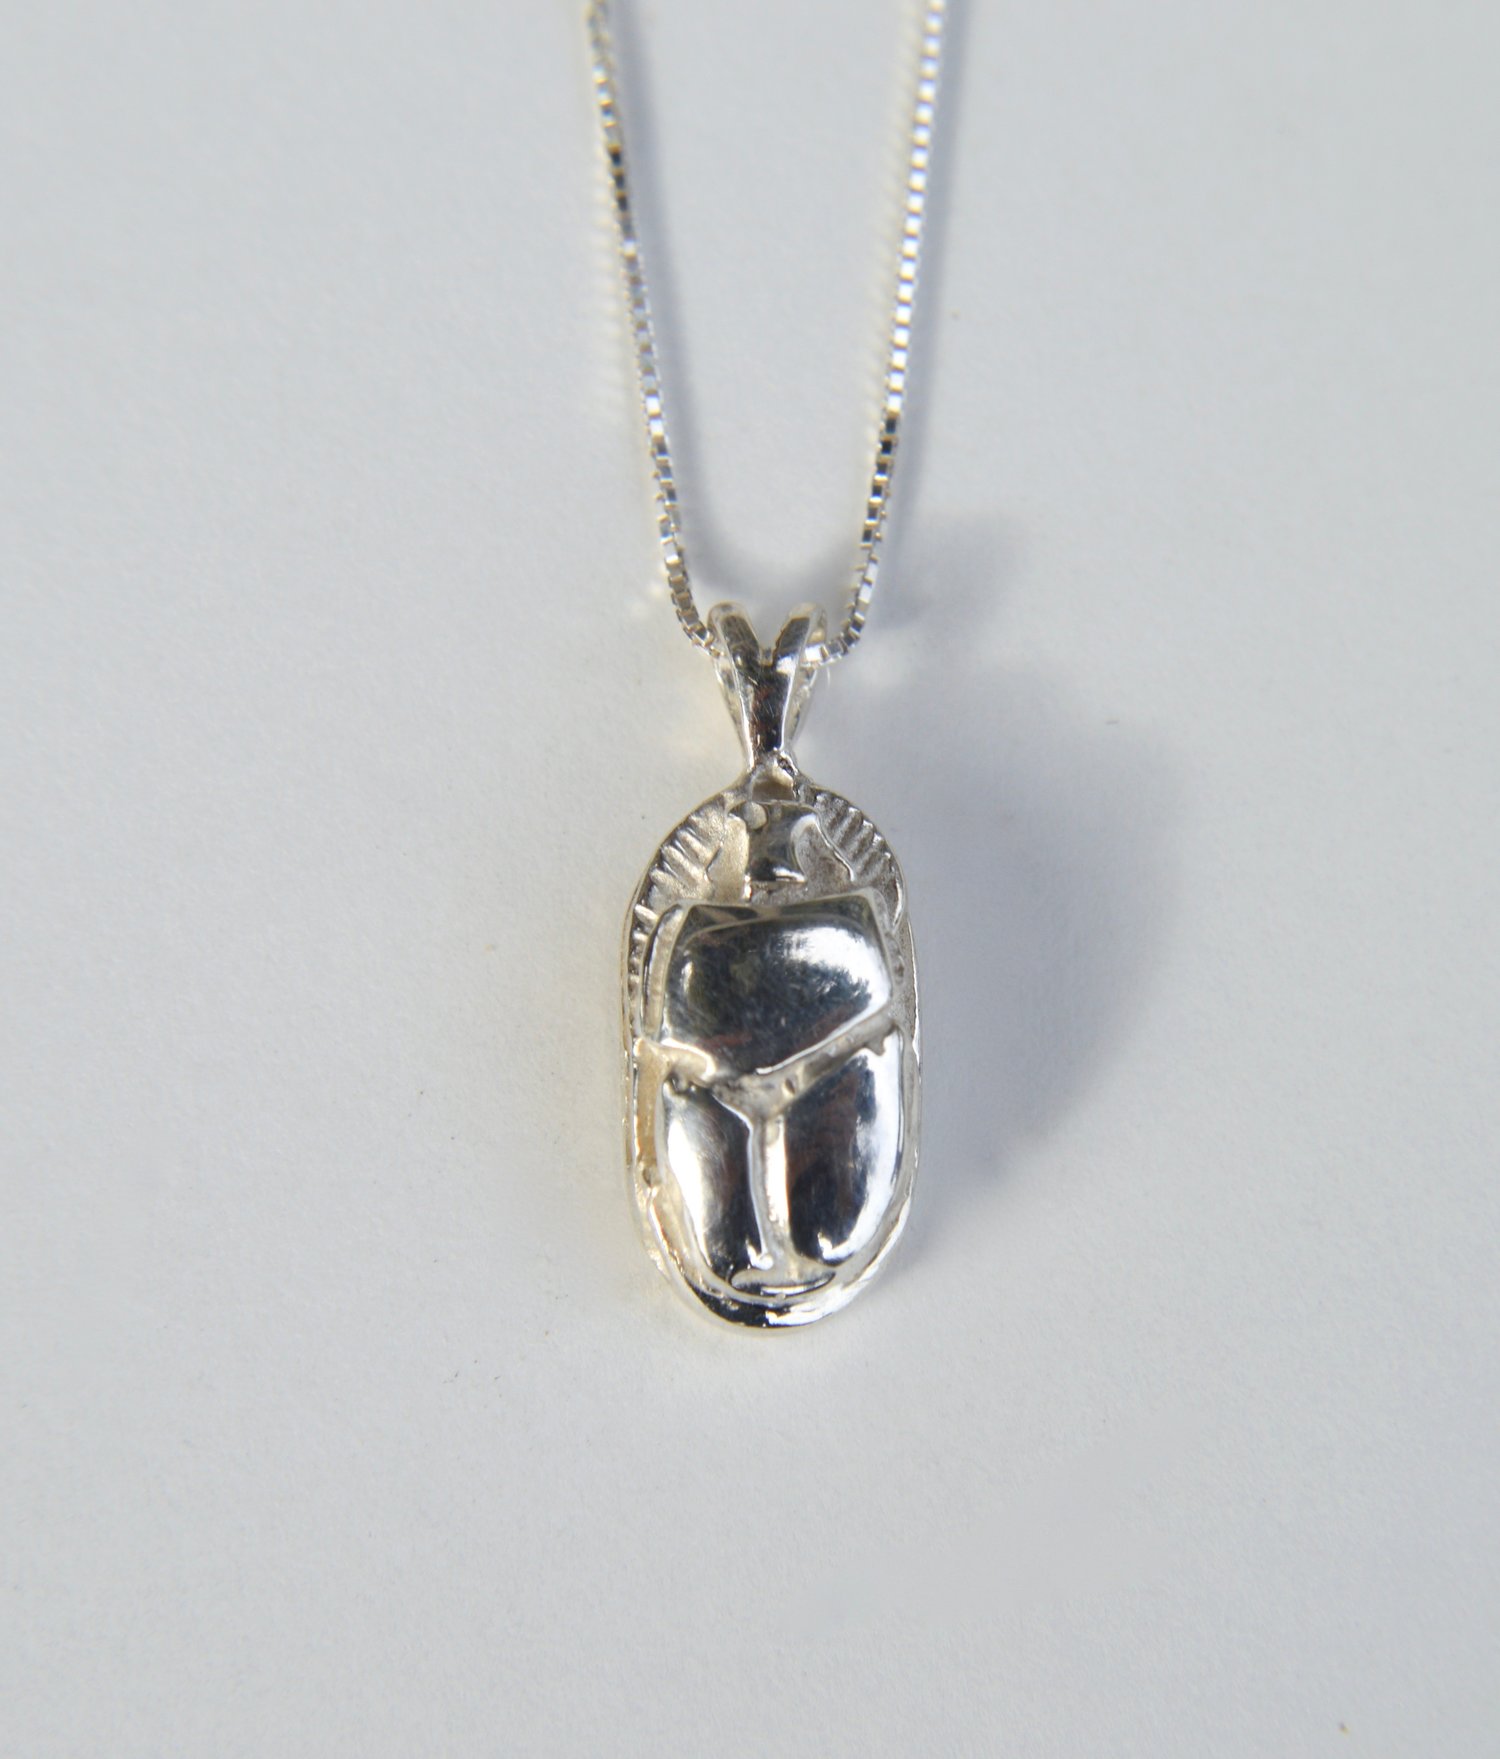 Egyptian Scarab Beetle Sterling Silver Pendant or Necklace